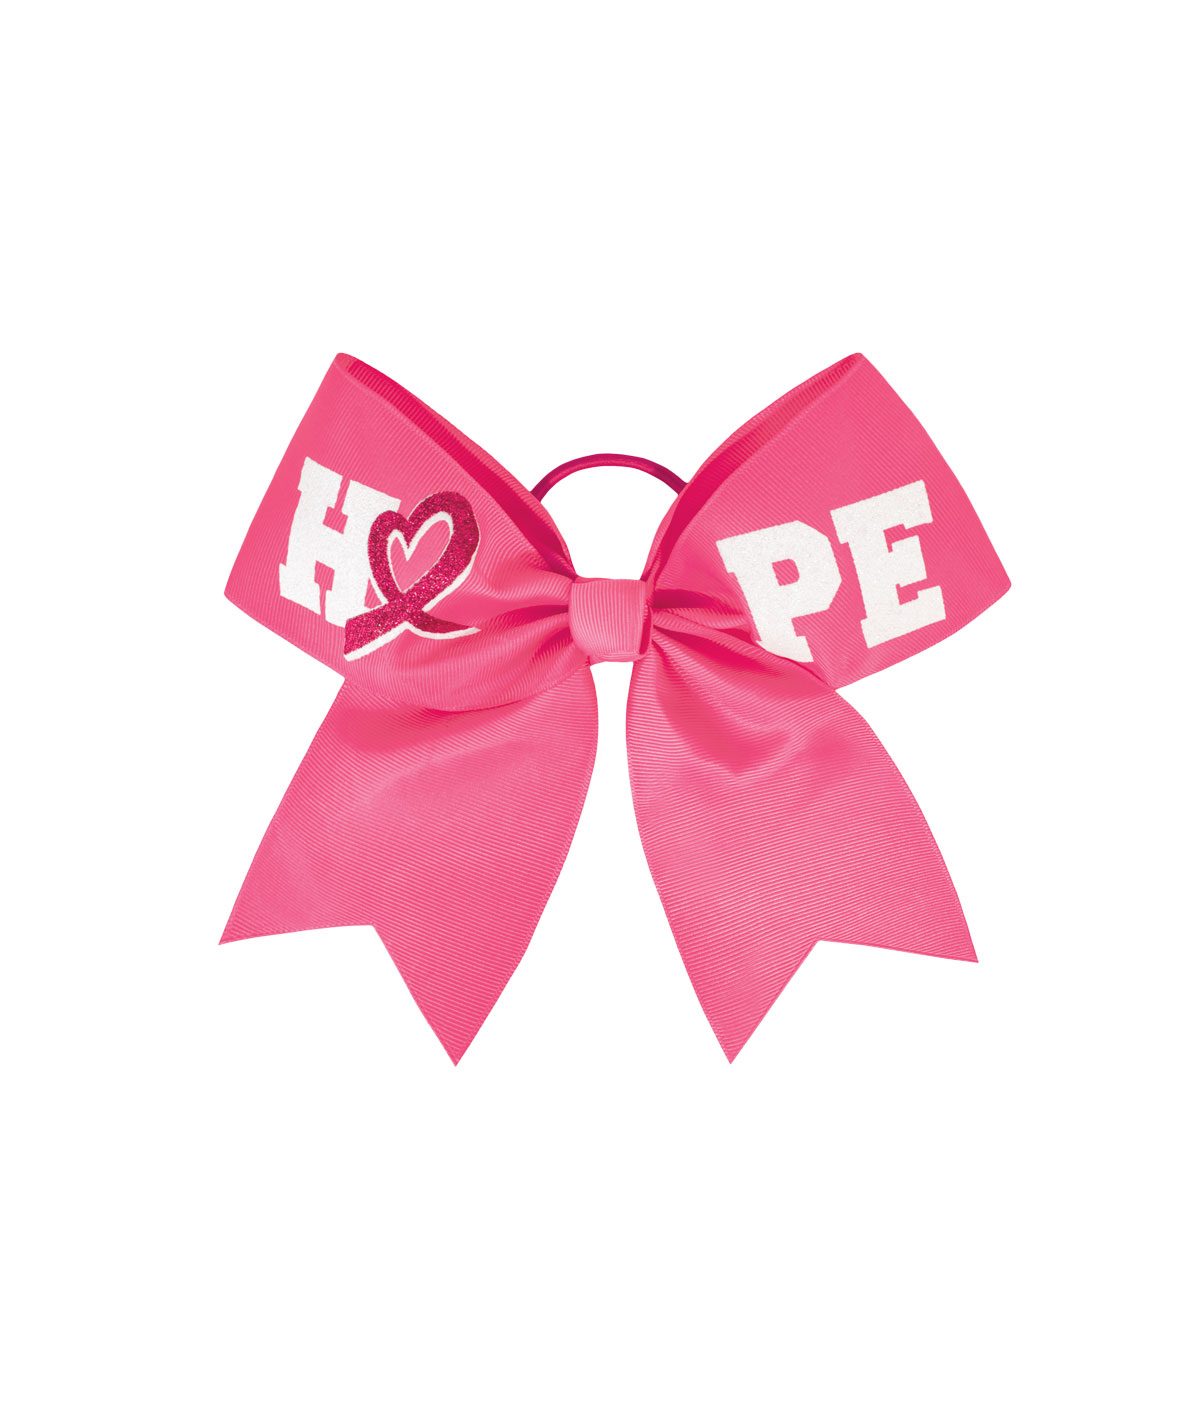 CHEER BOW Black & Pink Voltage Pattern Electricity in Pink 